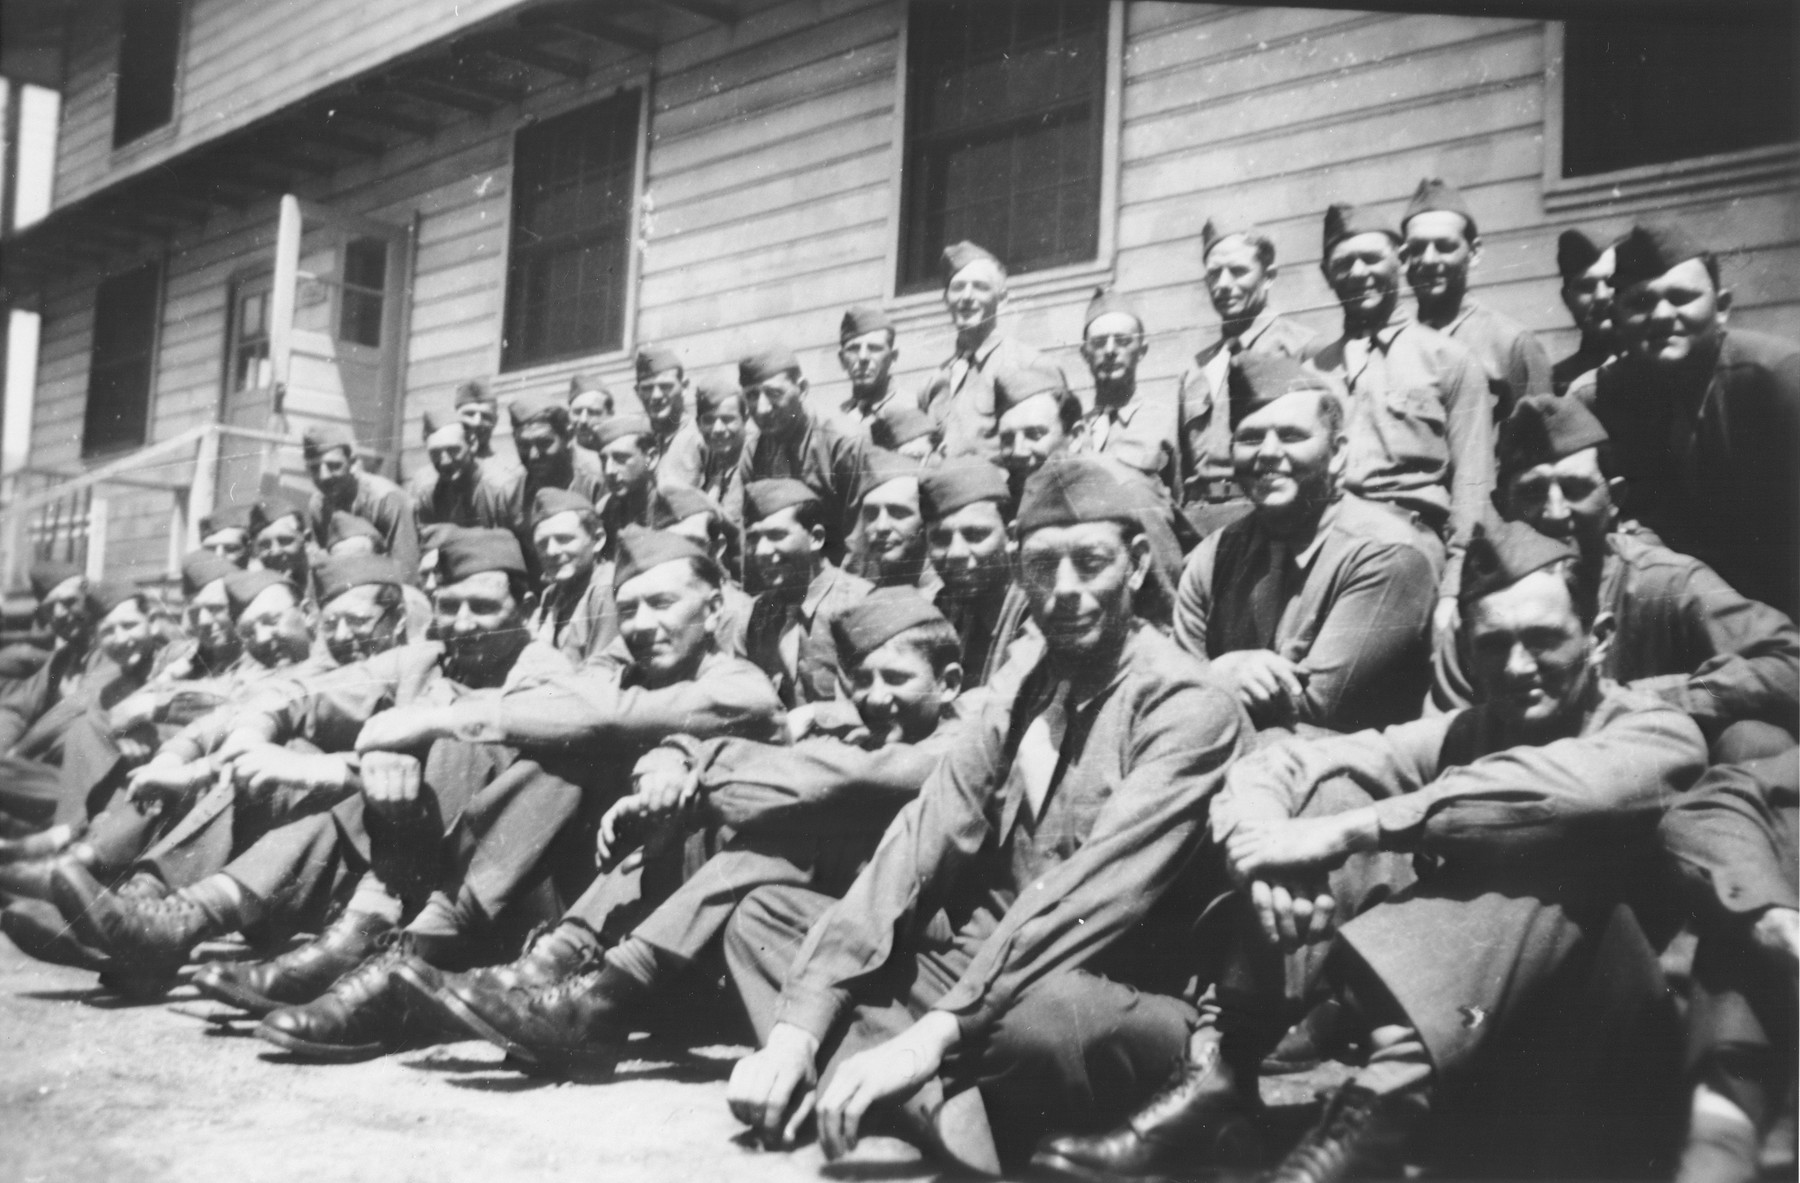 Otto Perl poses with his American army unit at Camp Ritchie, Maryland.

Willard Luther Richardson has been tentatively identified in the back row, far right.

Otto Perl was born in Vienna on September 22, 1915.  He was the son of Martha Knopfmacher and Leopold Perl, a Viennese businessman.  Otto had one brother, Kurt (b. 1917).  During the year preceeding the Anschluss, Otto was serving in the Austrian Army.  After his dismissal in March 1938 for being a Jew, Otto was arrested by the Gestapo and sent to Dachau.  On September 22 he was transferred to Buchenwald, where he remained until his release on March 15, 1939.  He then returned to Vienna.  With the help of a friend who had emigrated to the US in 1933, Otto was able to get an American visa.  He left Austria in June 1939 but was waylaid for nine months in a refugee camp in Ramsgate, England, before reaching New York in March 1940.  Otto's mother committed suicide in 1941 or 1942.  His father was arrested in Vienna in 1942 and died of a heart attack while on his way to the deportation trains.  Otto's younger brother escaped to Italy and from there made his way to Columbia.  Later, he was able to join Otto in the United States.